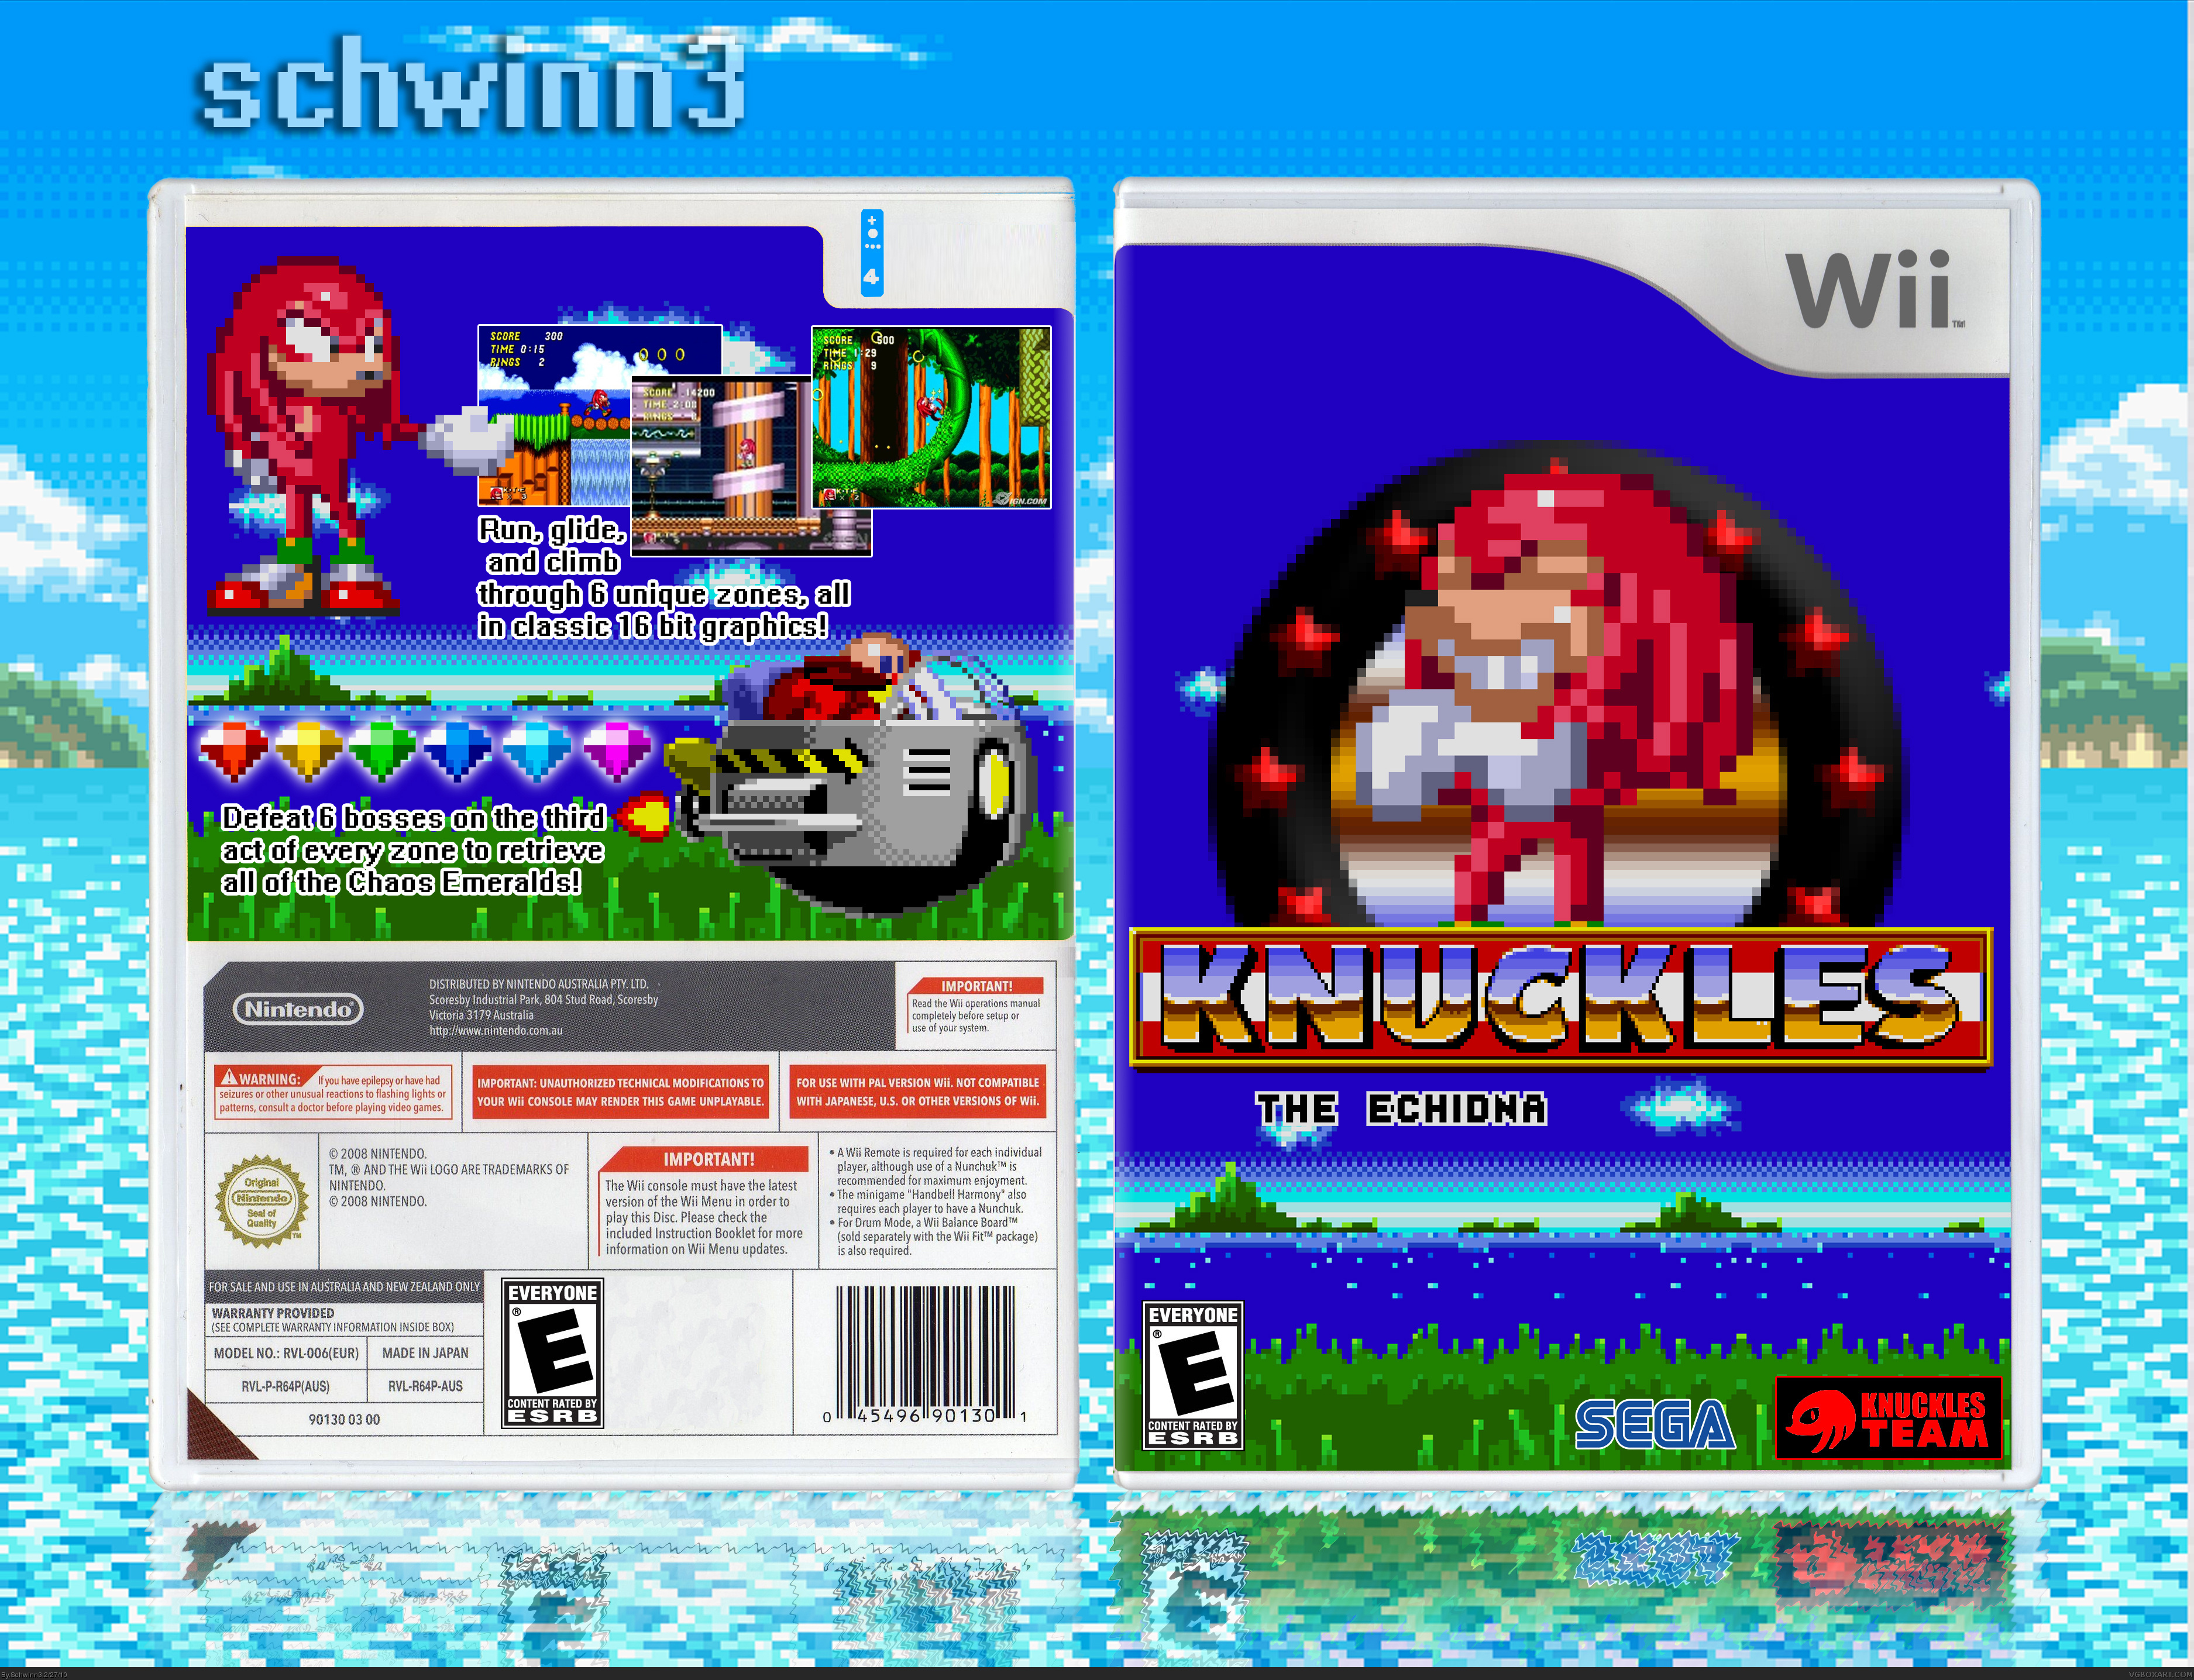 Knuckles The Echidna box cover